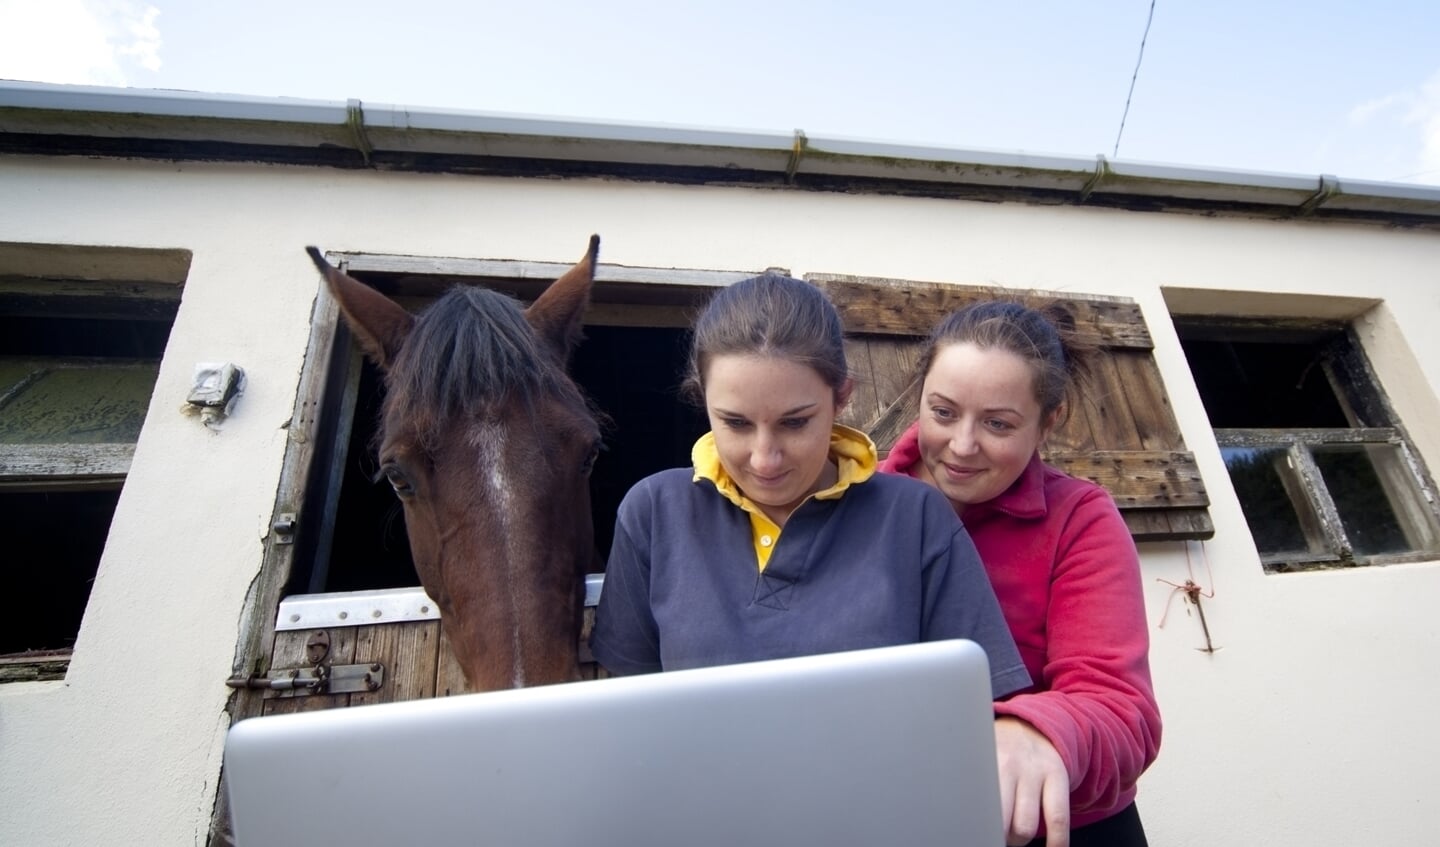 2 women and a horse looking at computer screen